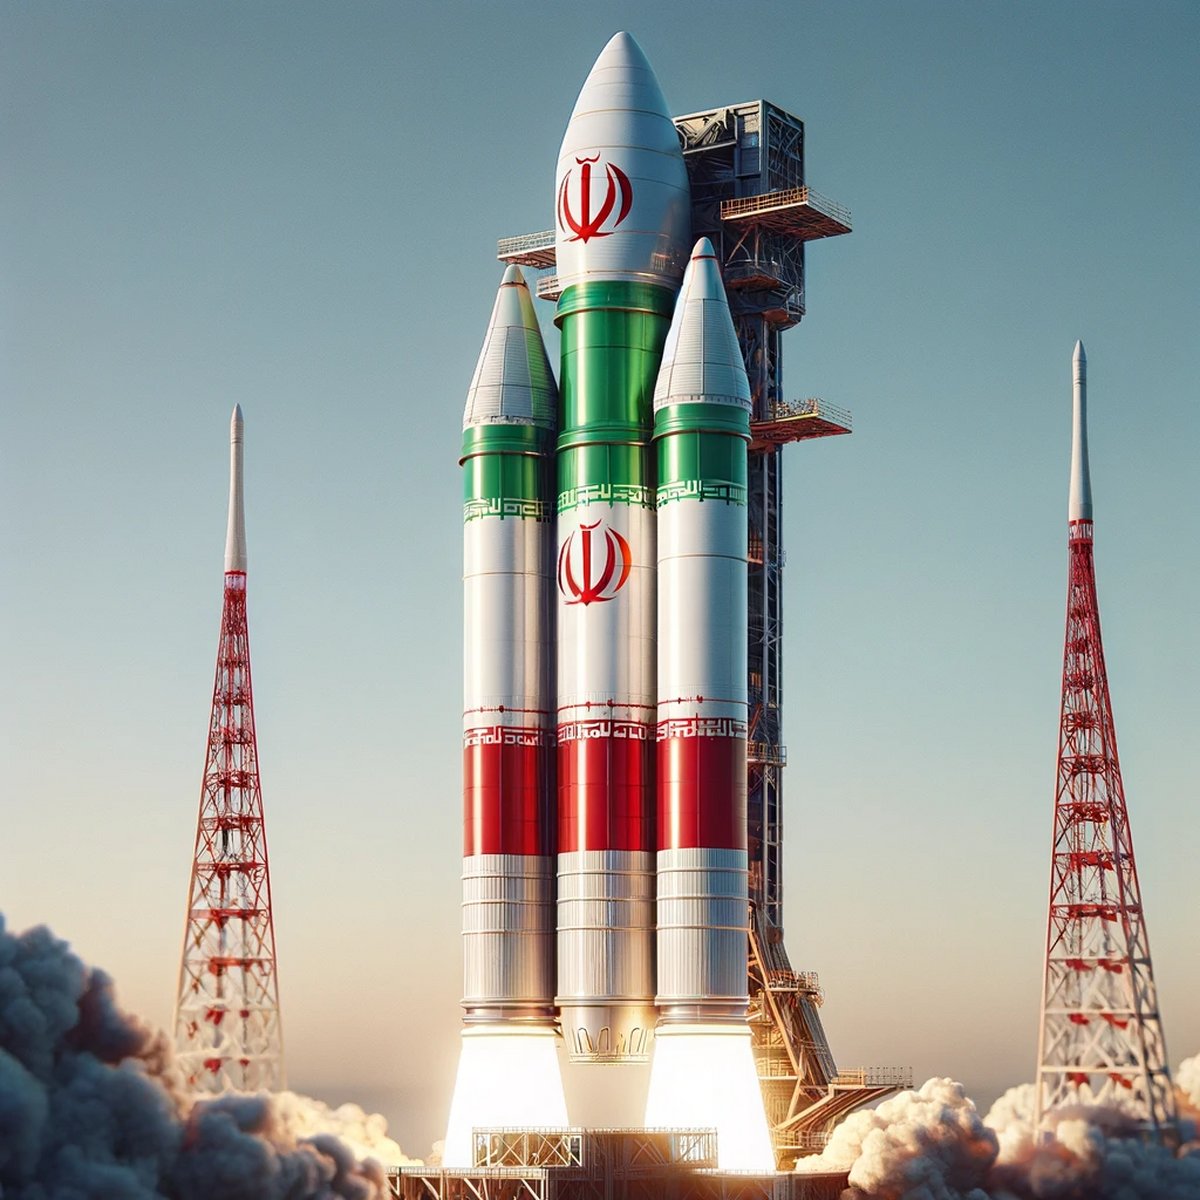 ️🇮🇷 Iran soars into space! Three satellites successfully launched, reaching heights of 450-1,100 km. A milestone for the nation's space program.
#IranSpace #SatelliteLaunch #SpaceTech